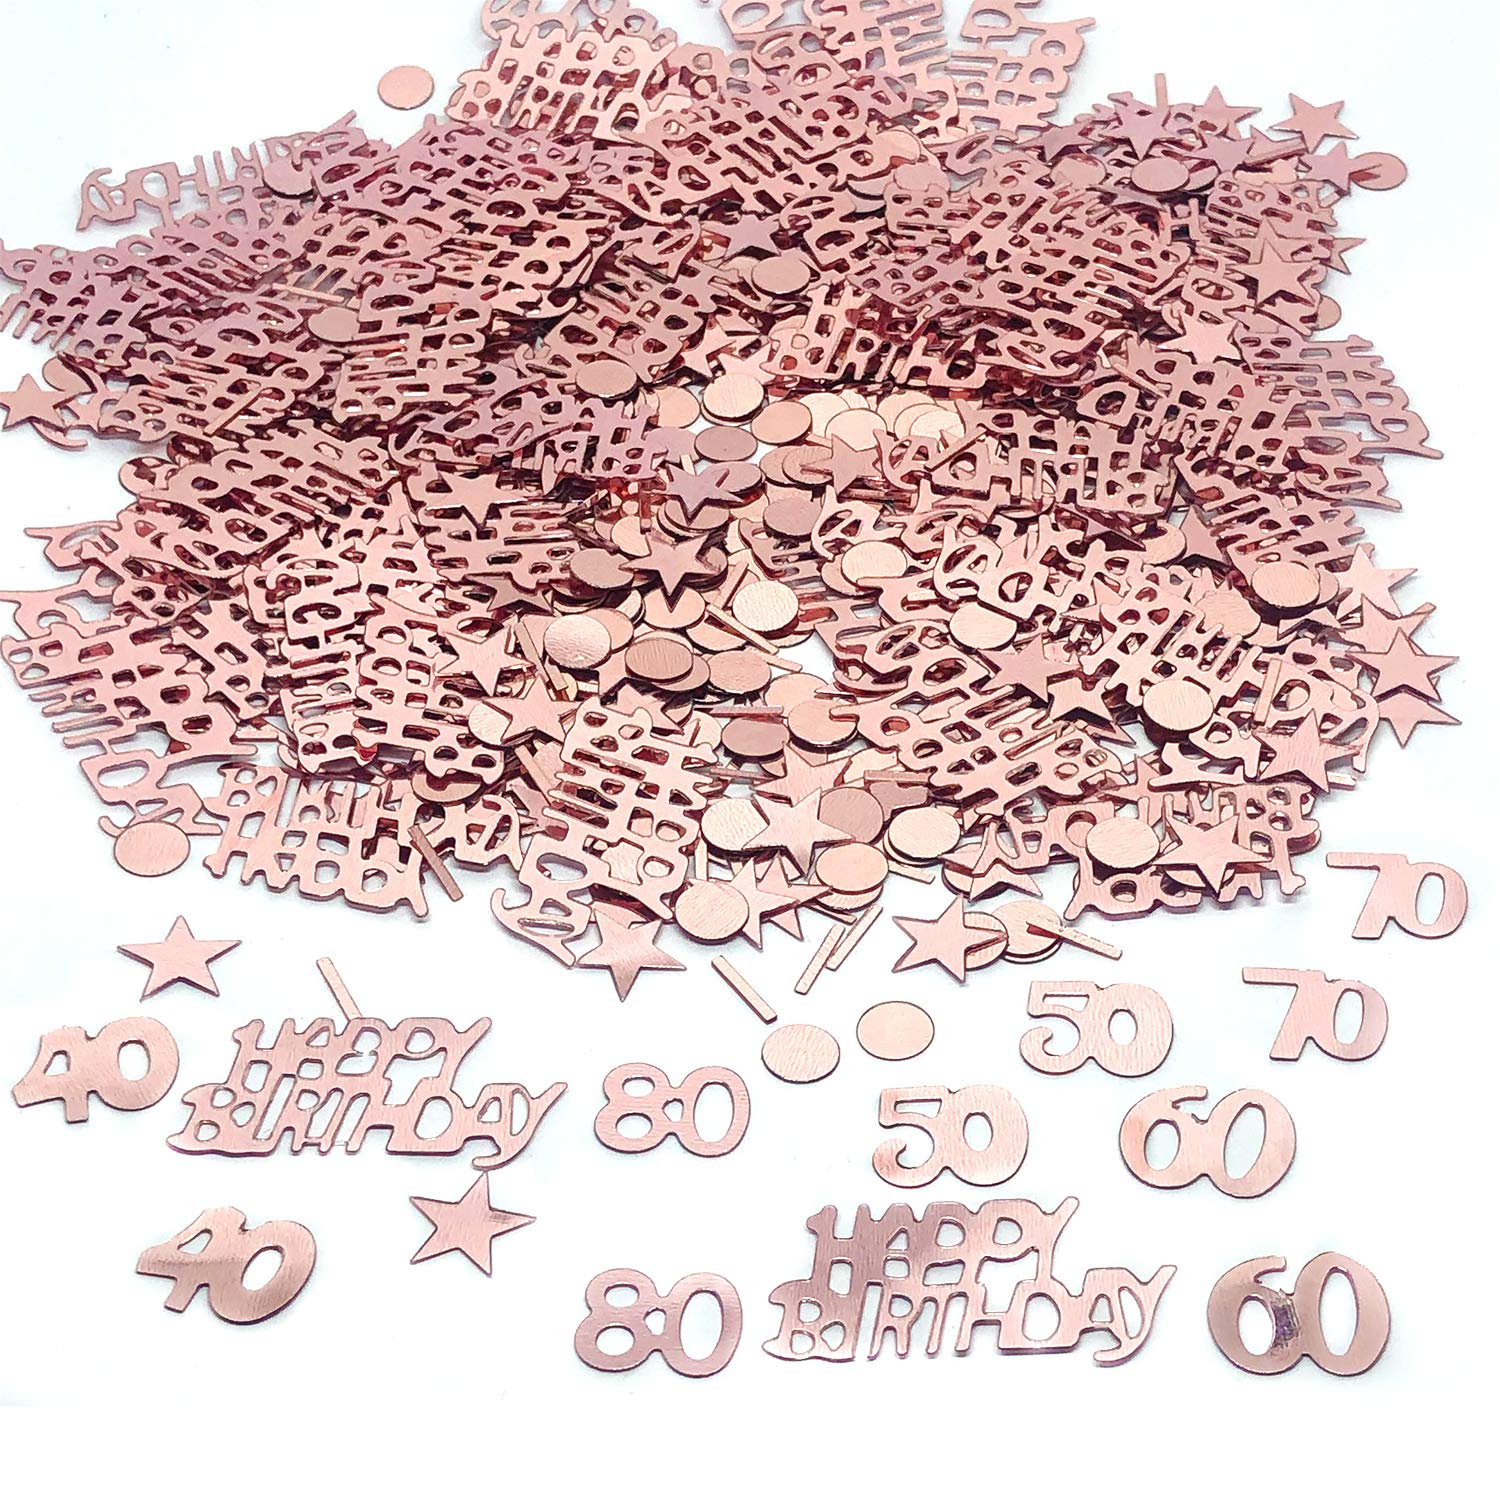 TFYU Happy Birthday Party Table Confetti - Twinkle Stars Foil Metallic Sequins Confetti and Special Events Table Scatters Decorations Confetti Decorations about 700pcs（Rose gold） (60 years old)